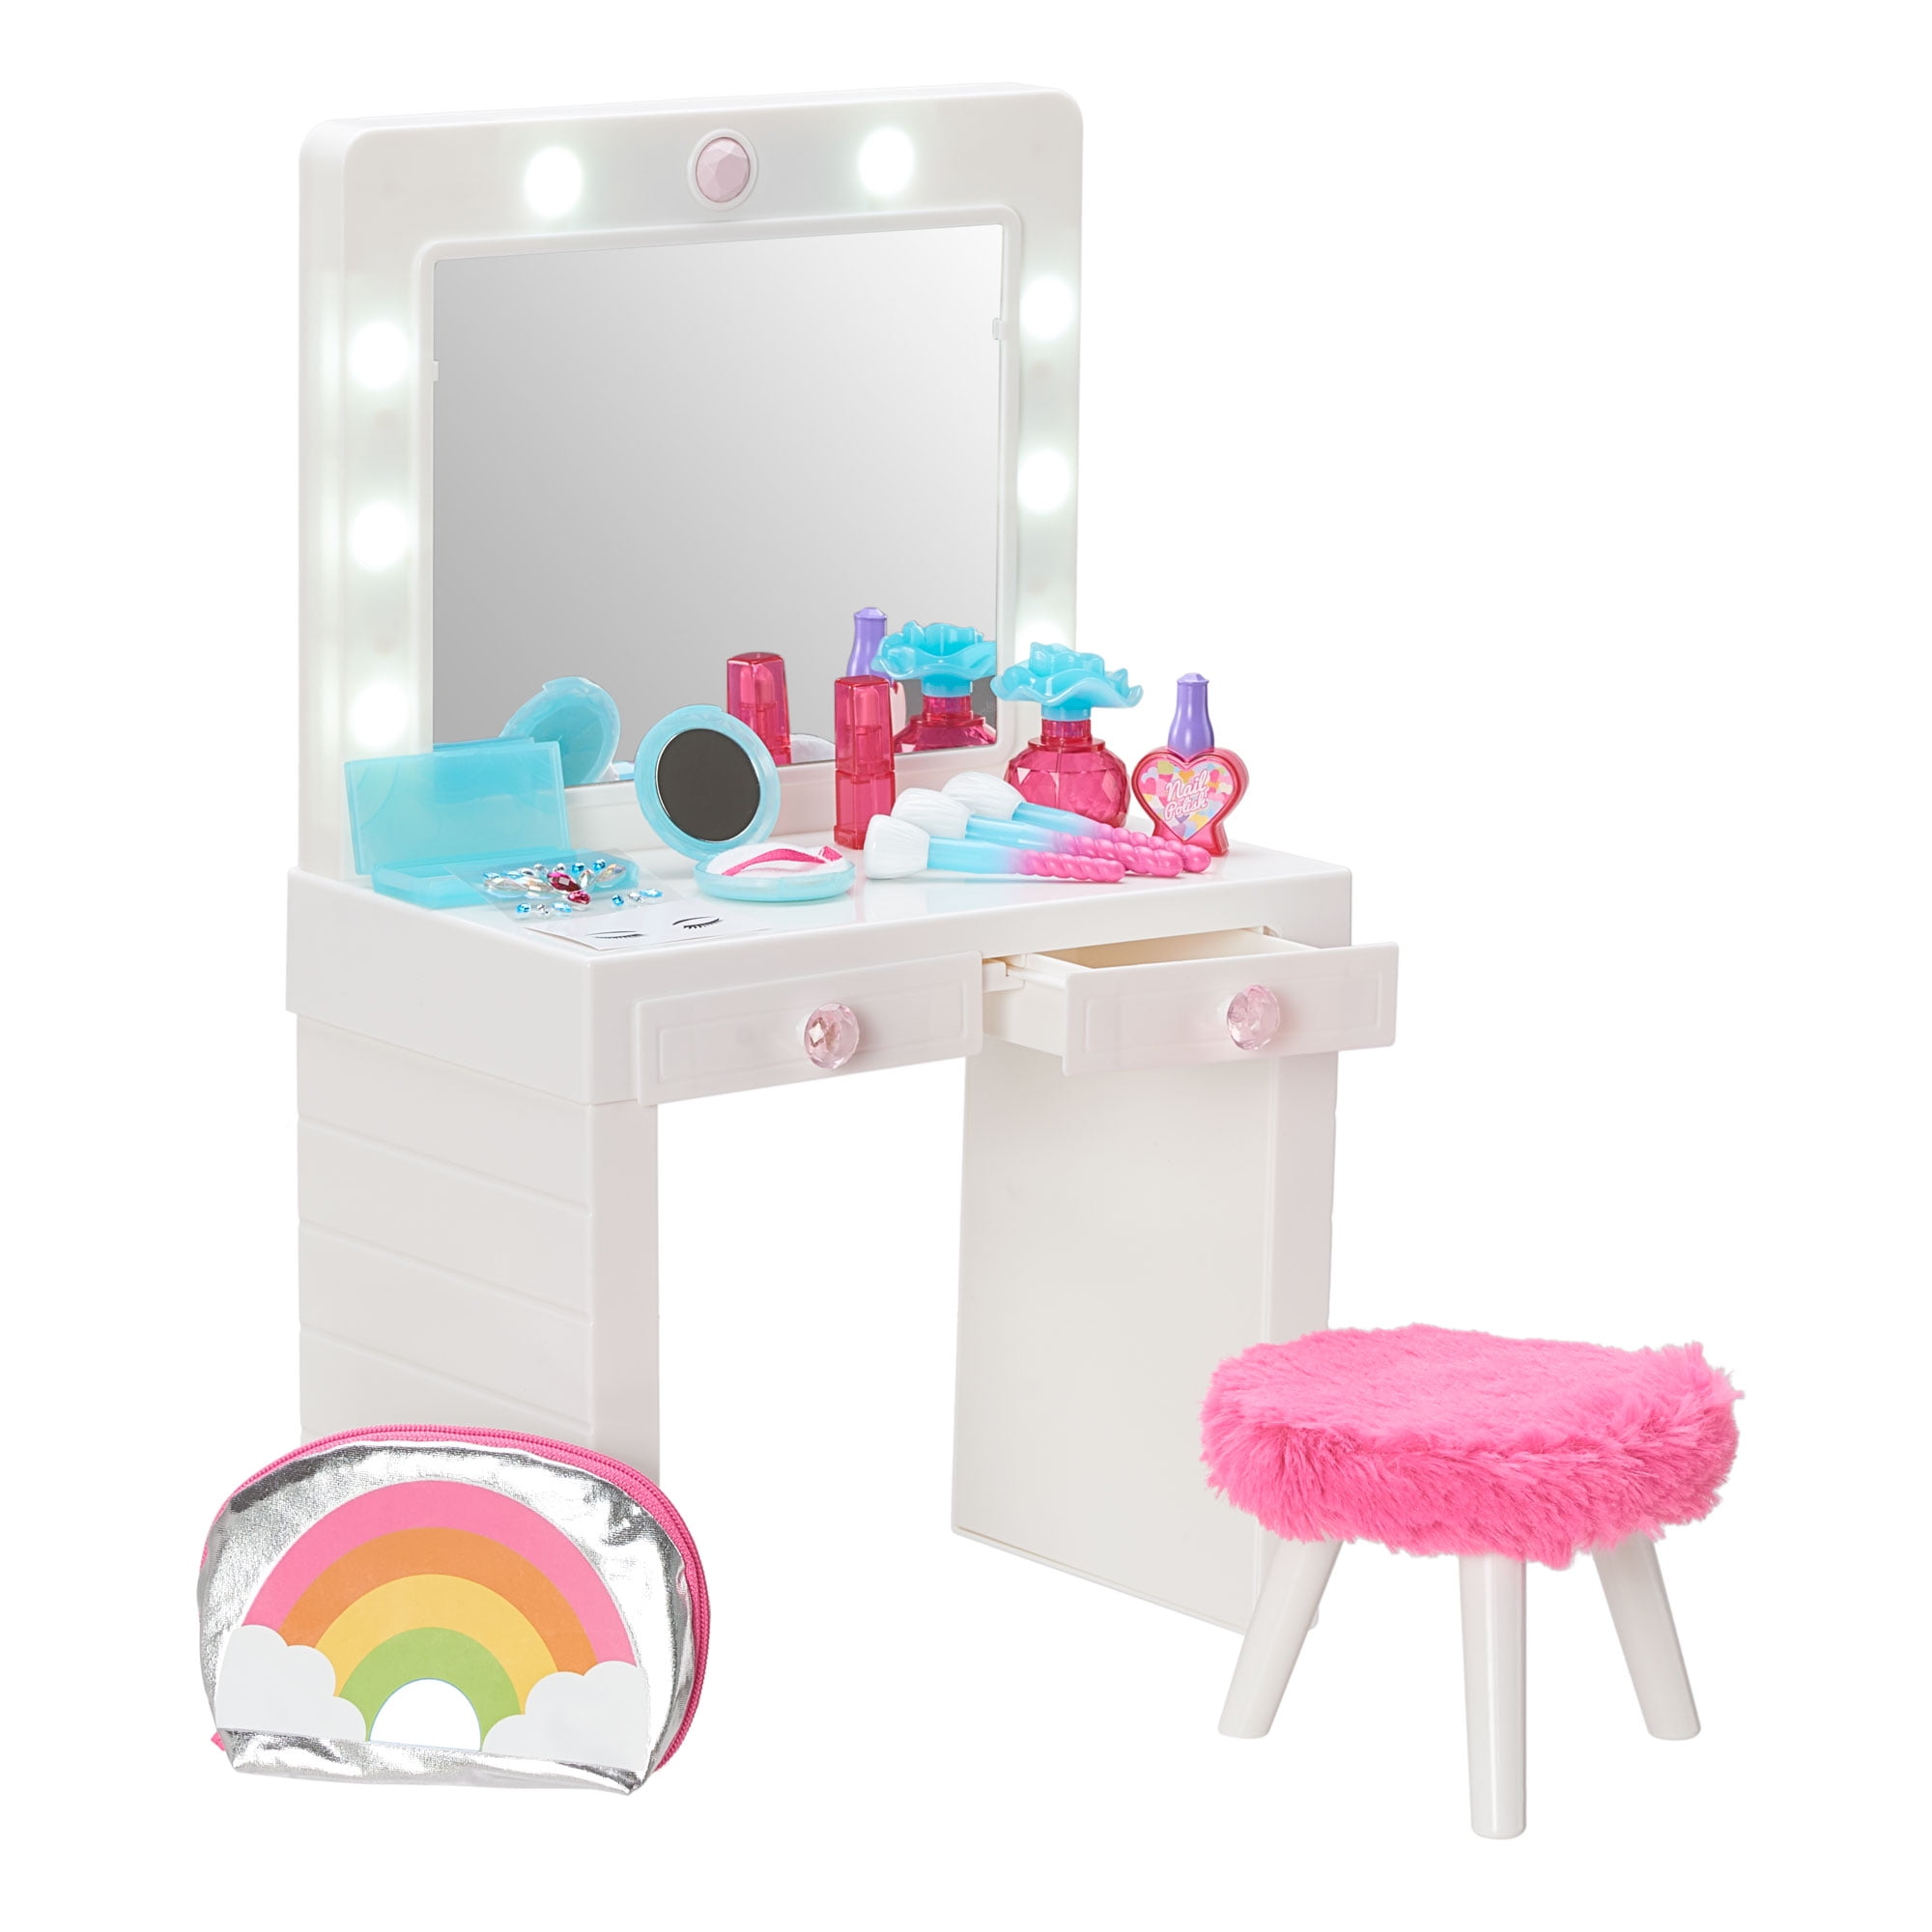 My Life As 13-Piece Vanity Play Set for 18 Inch Dolls